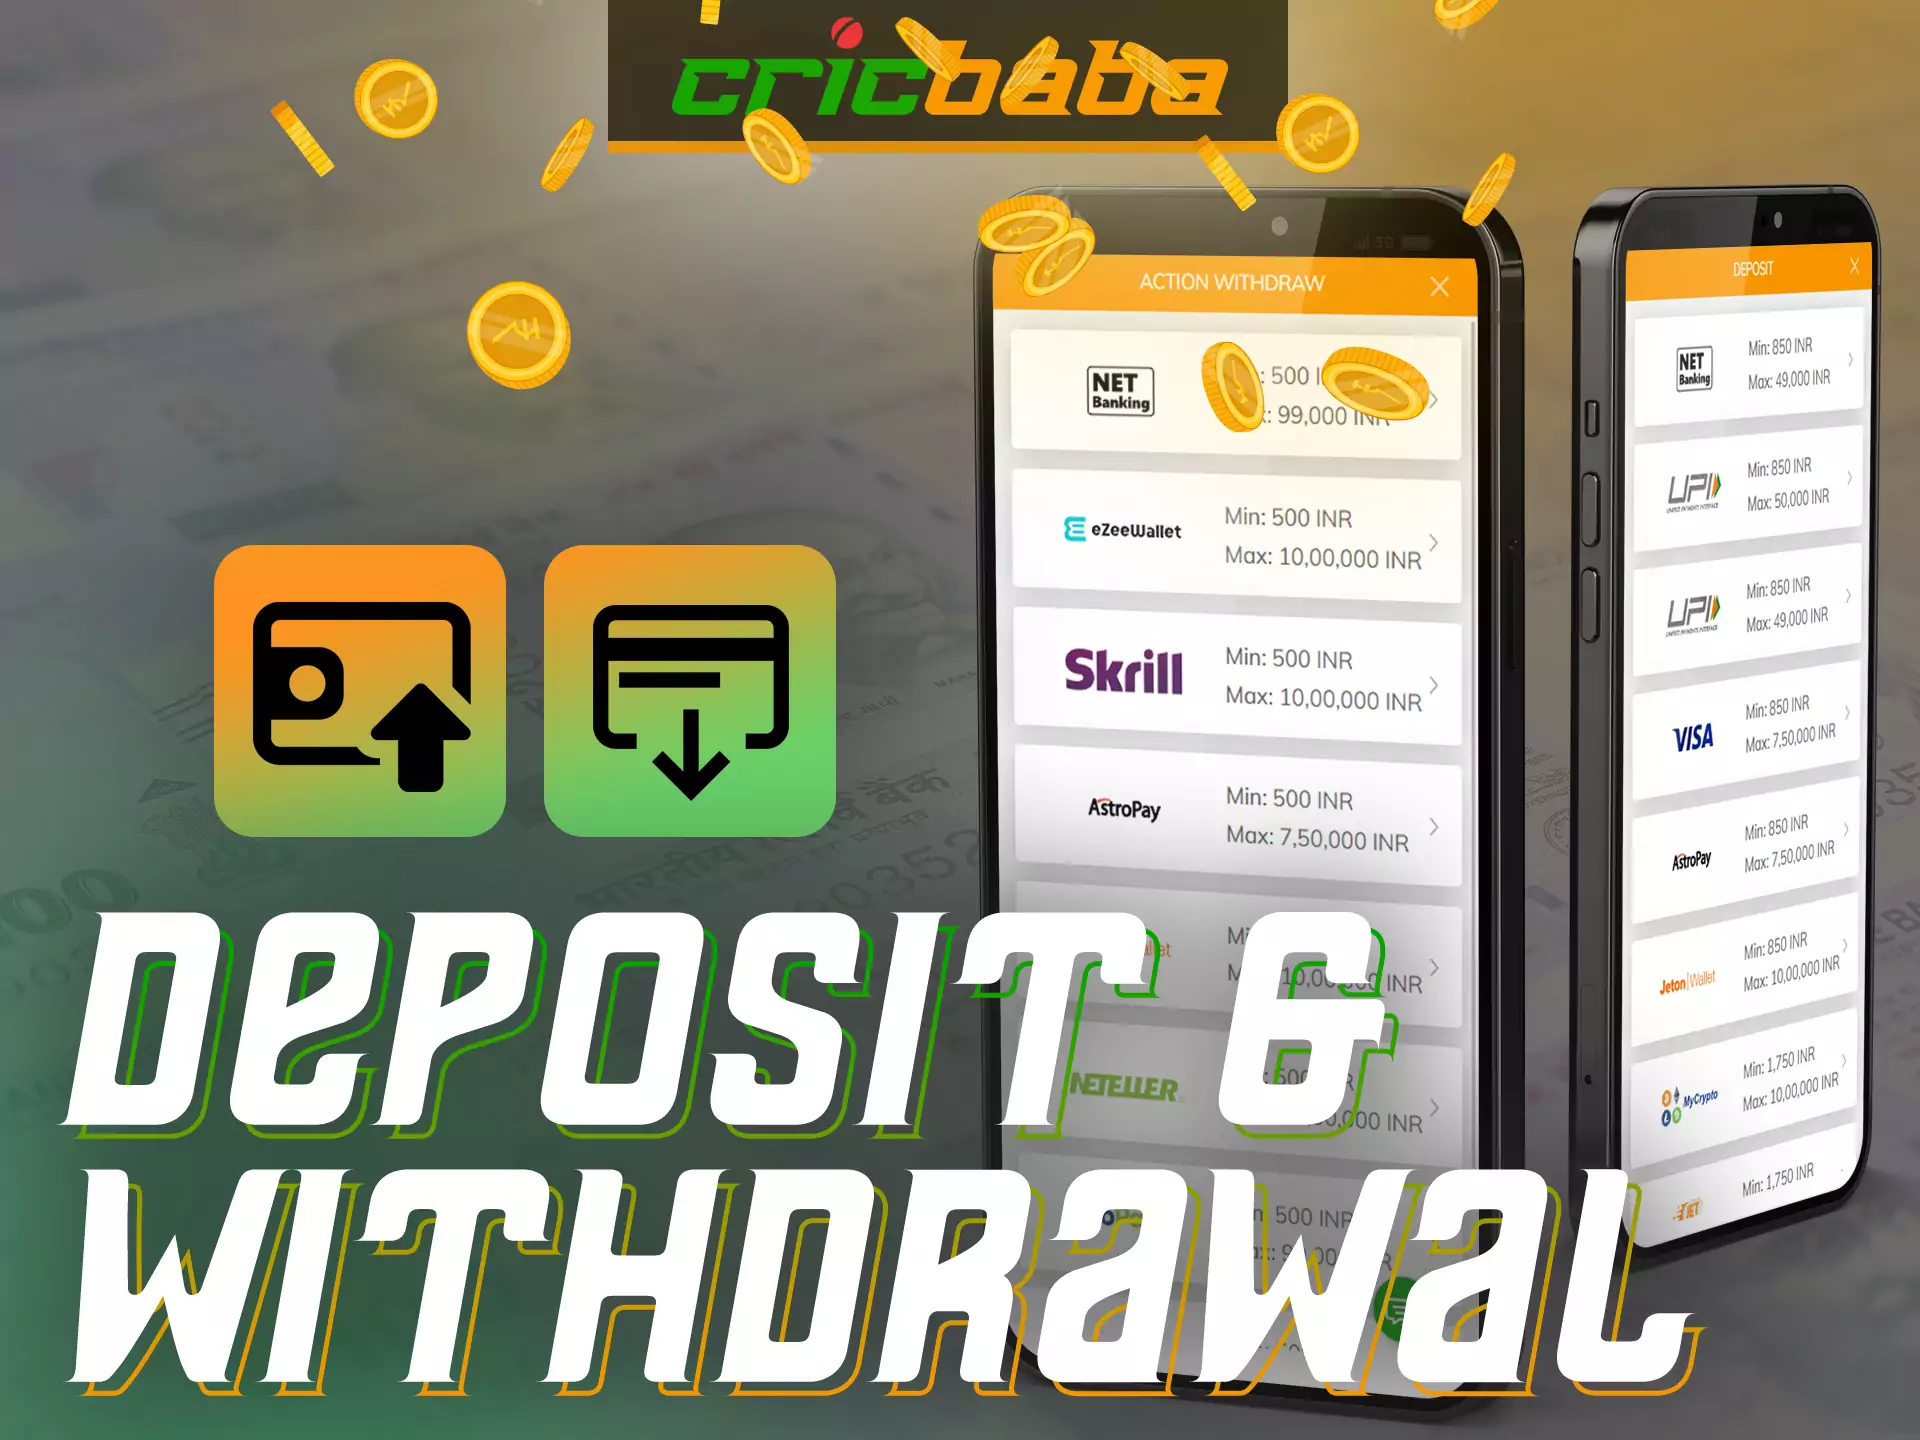 Find out how to quickly dtposit your Cricbaba account and how to withdraw money.